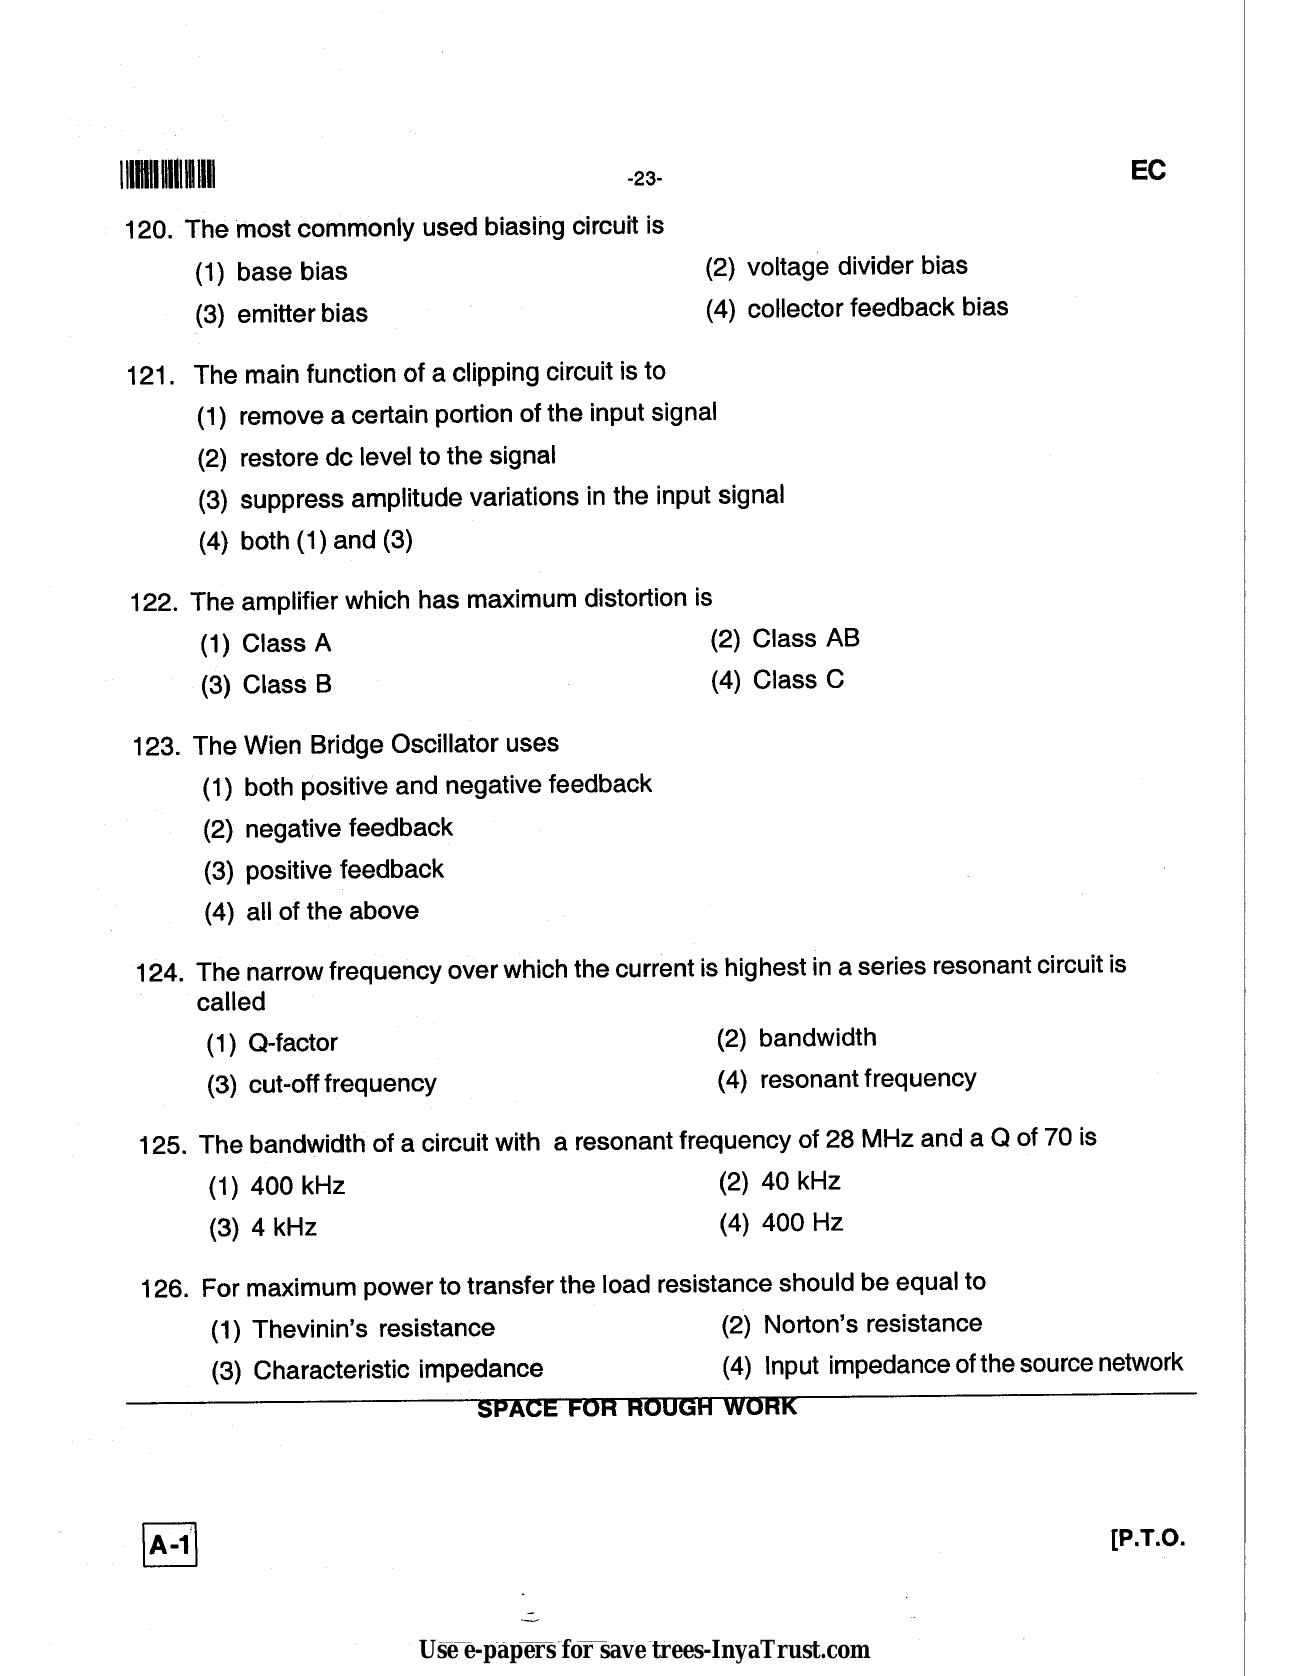 Karnataka Diploma CET- 2013 Electronics and Communication Engineering Question Paper - Page 23